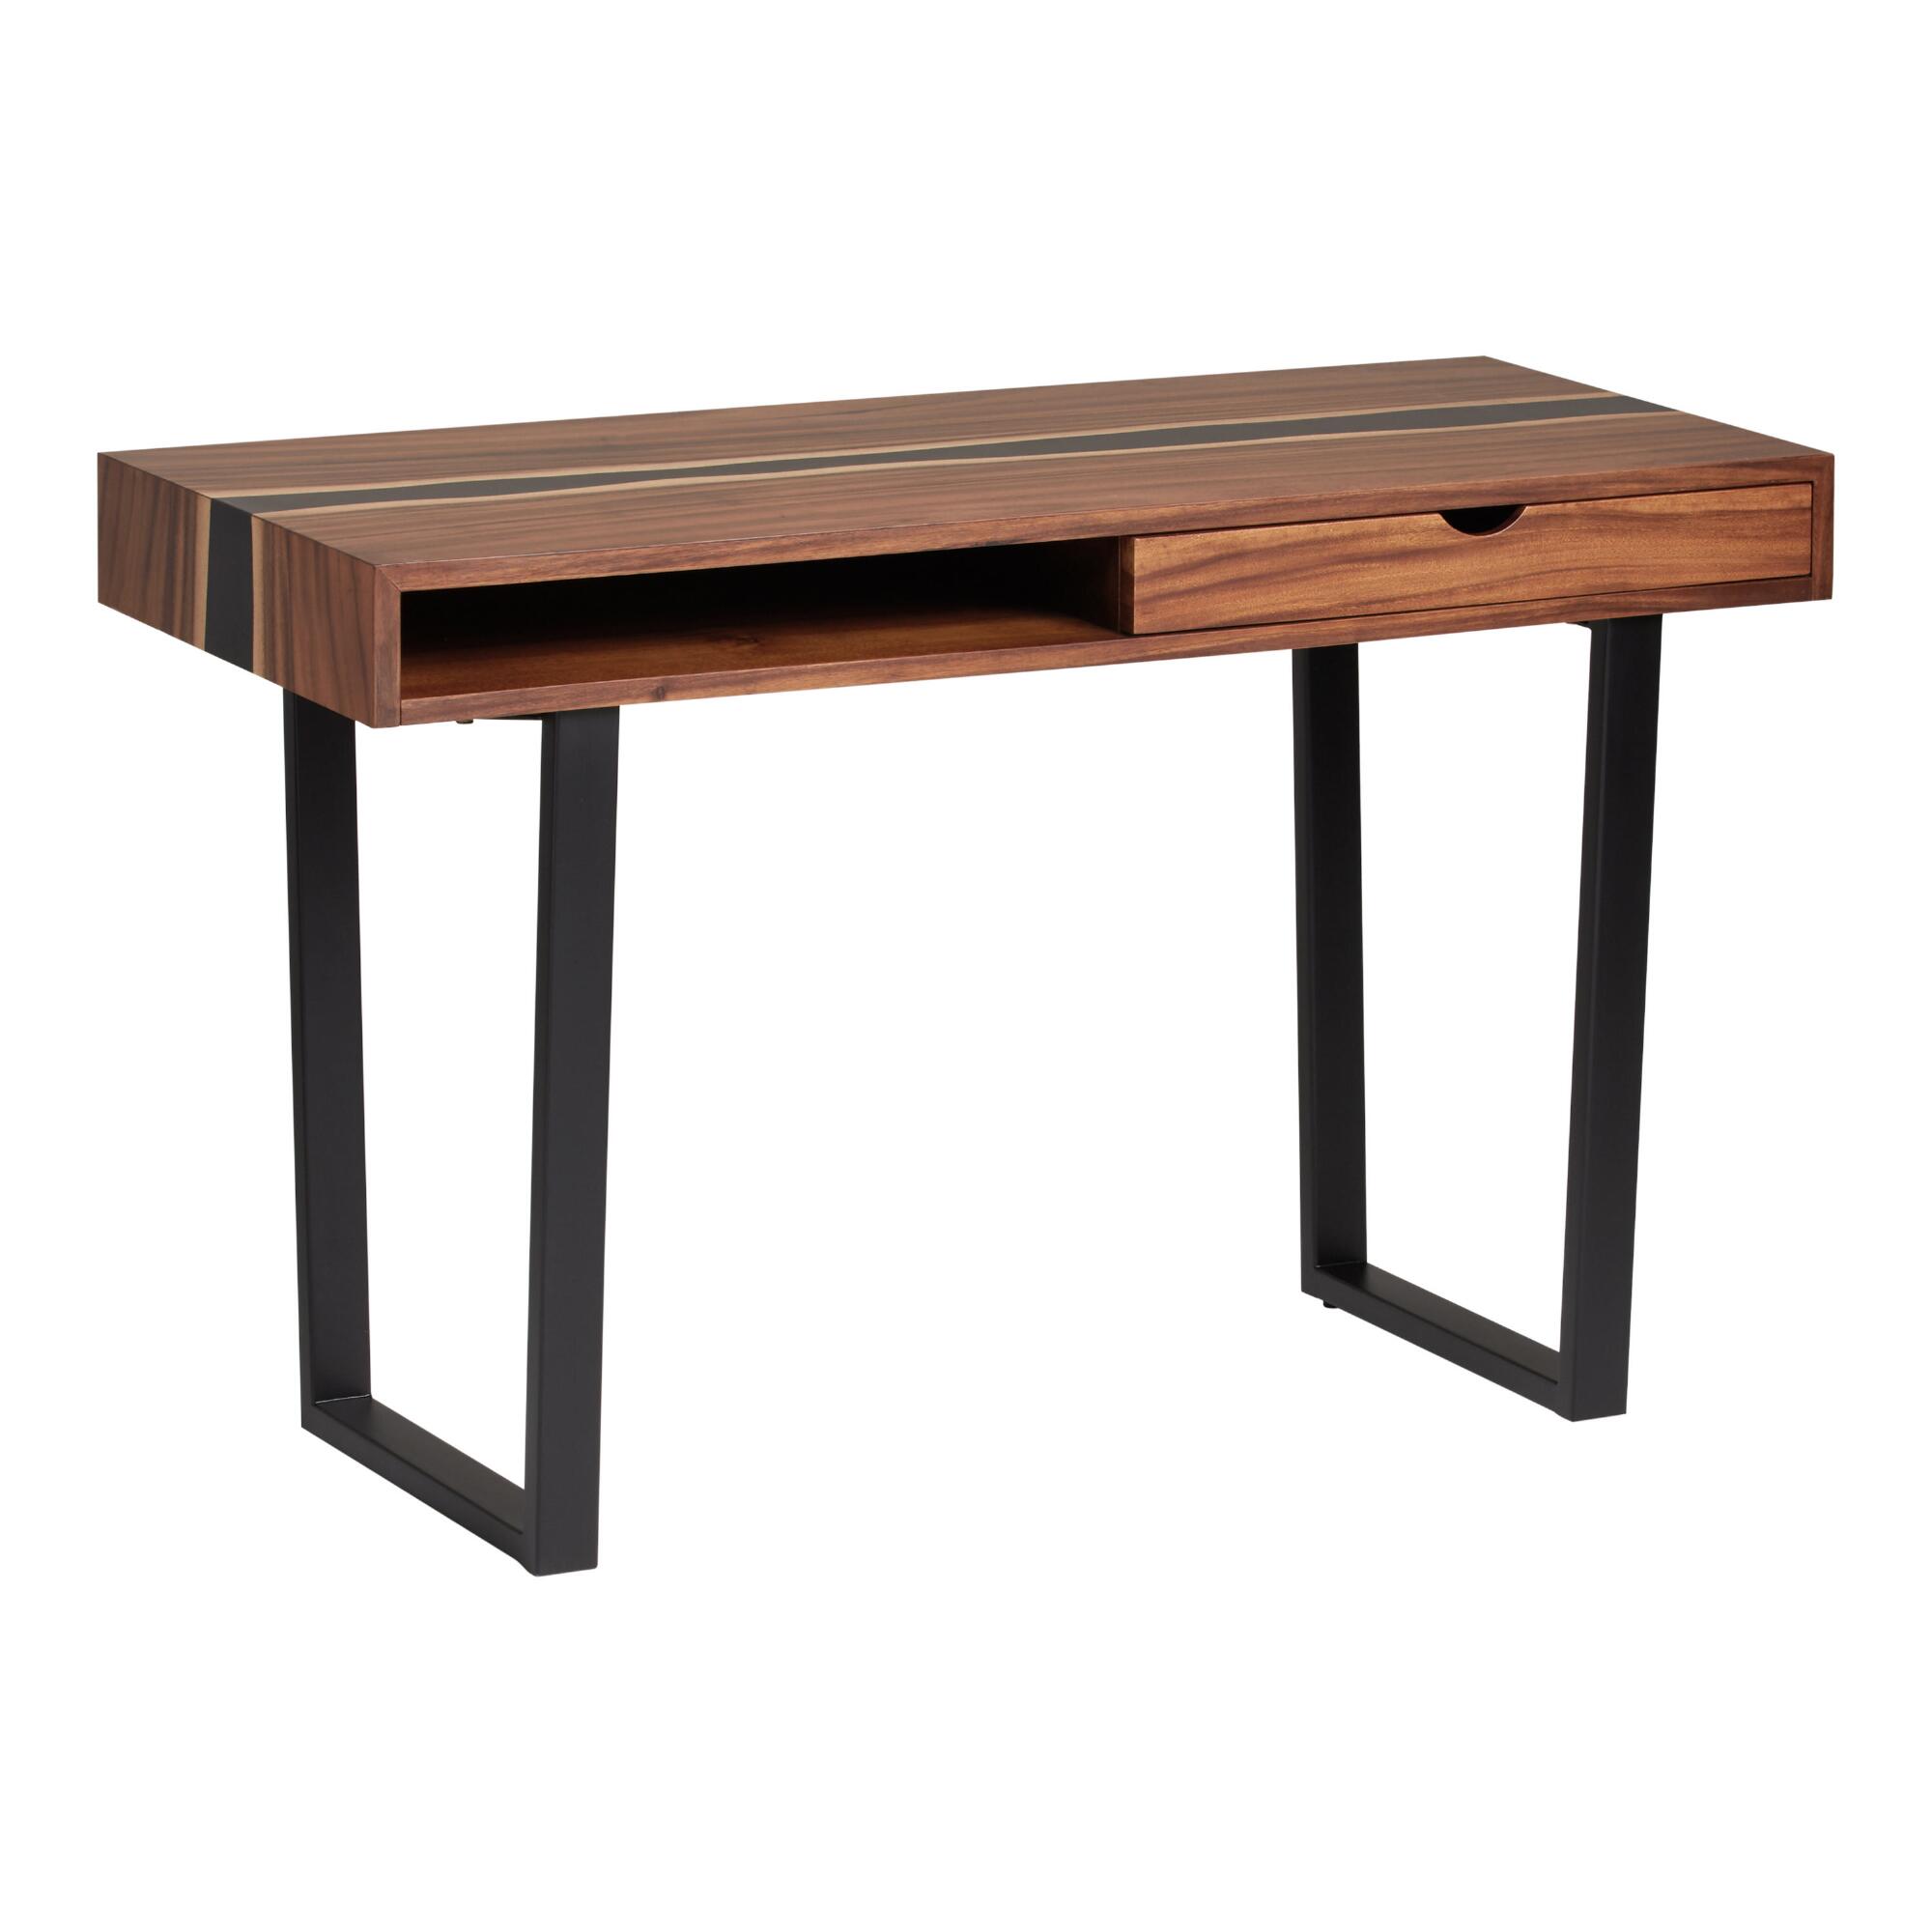 Live Edge Wood and Resin Cailen Desk: Black/Brown/Wood - Metal by World Market